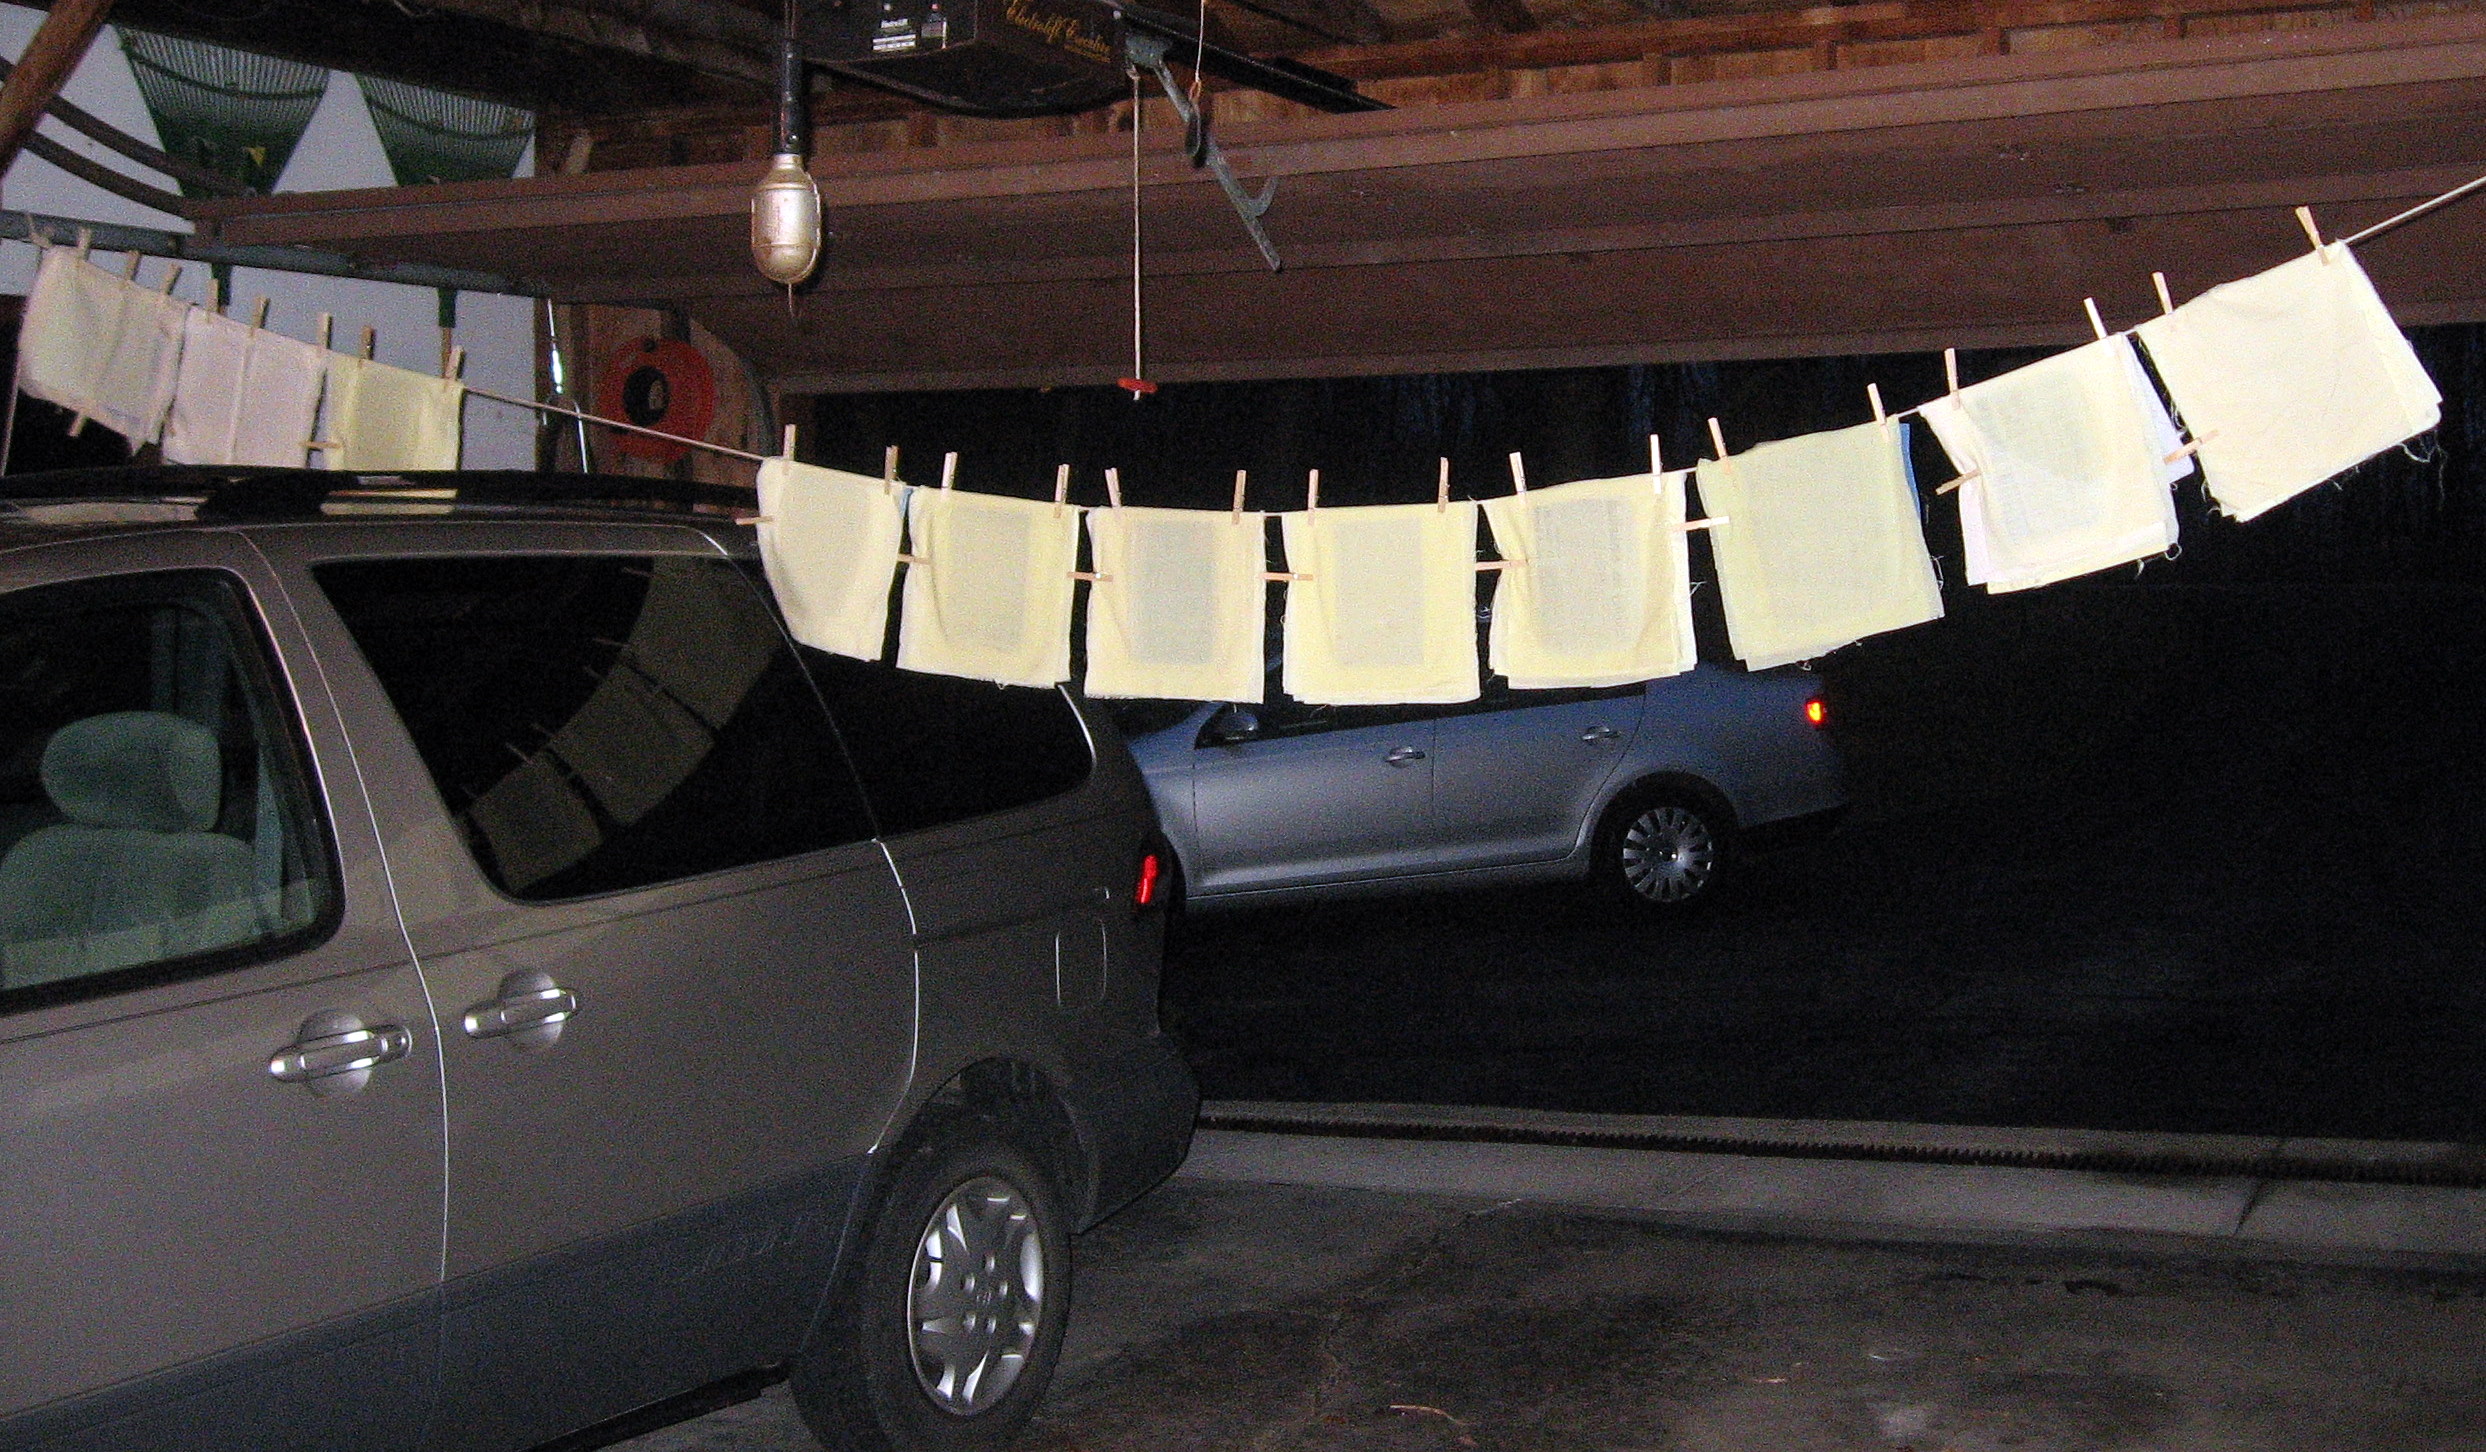 Paper drying in the garage.